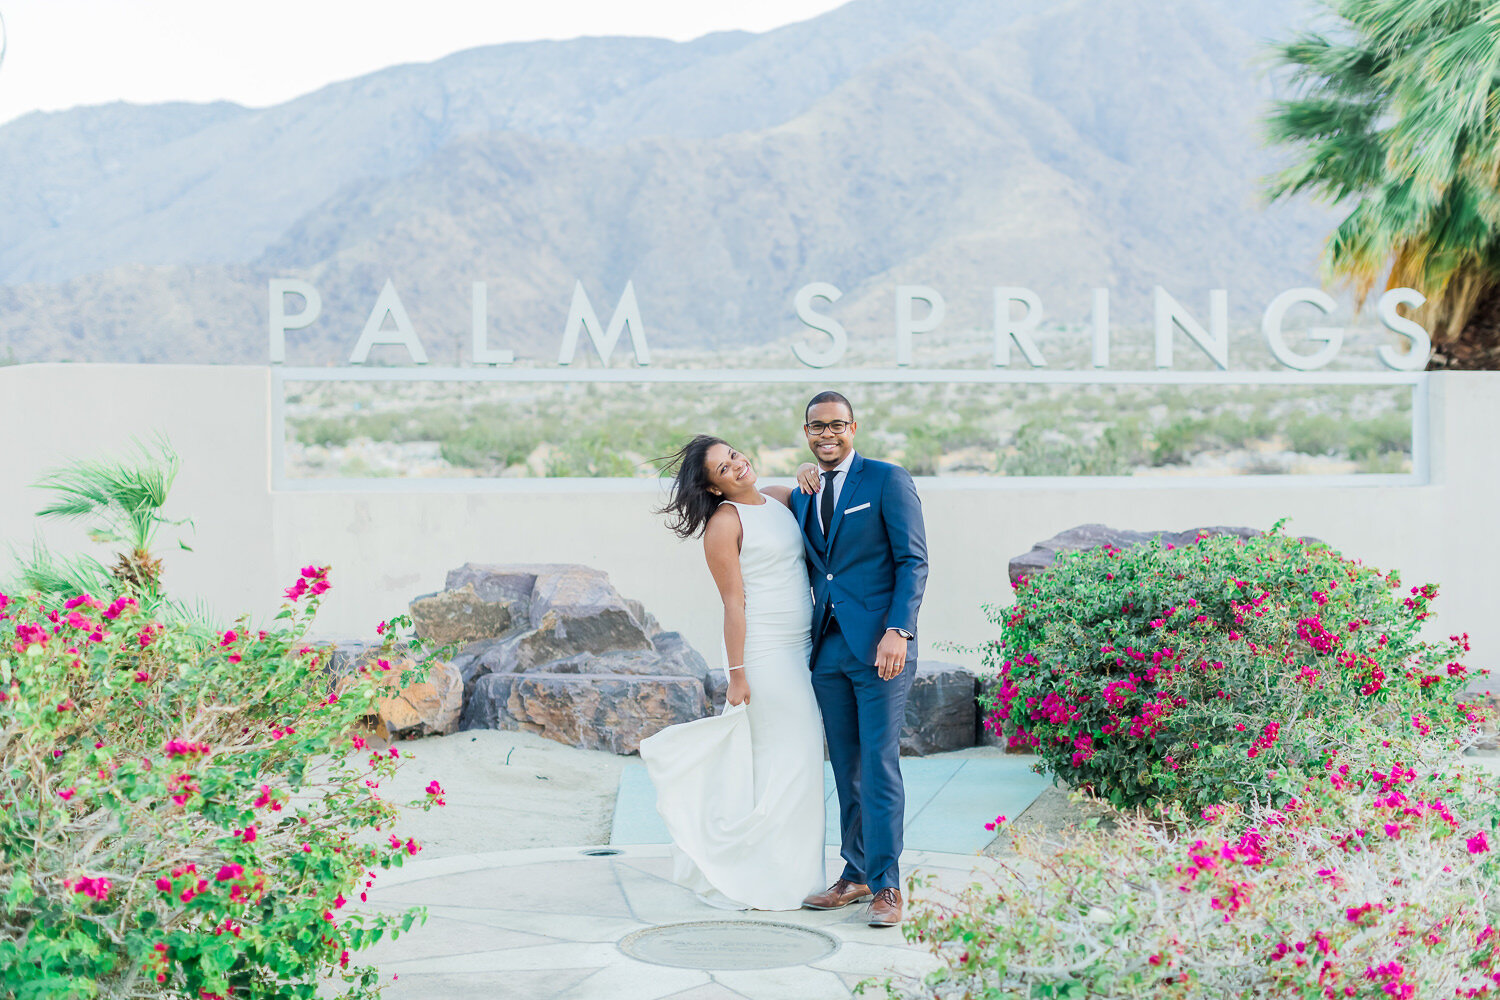 sevelle.elopement.palm.springs.sign.monocle.project-236.jpg